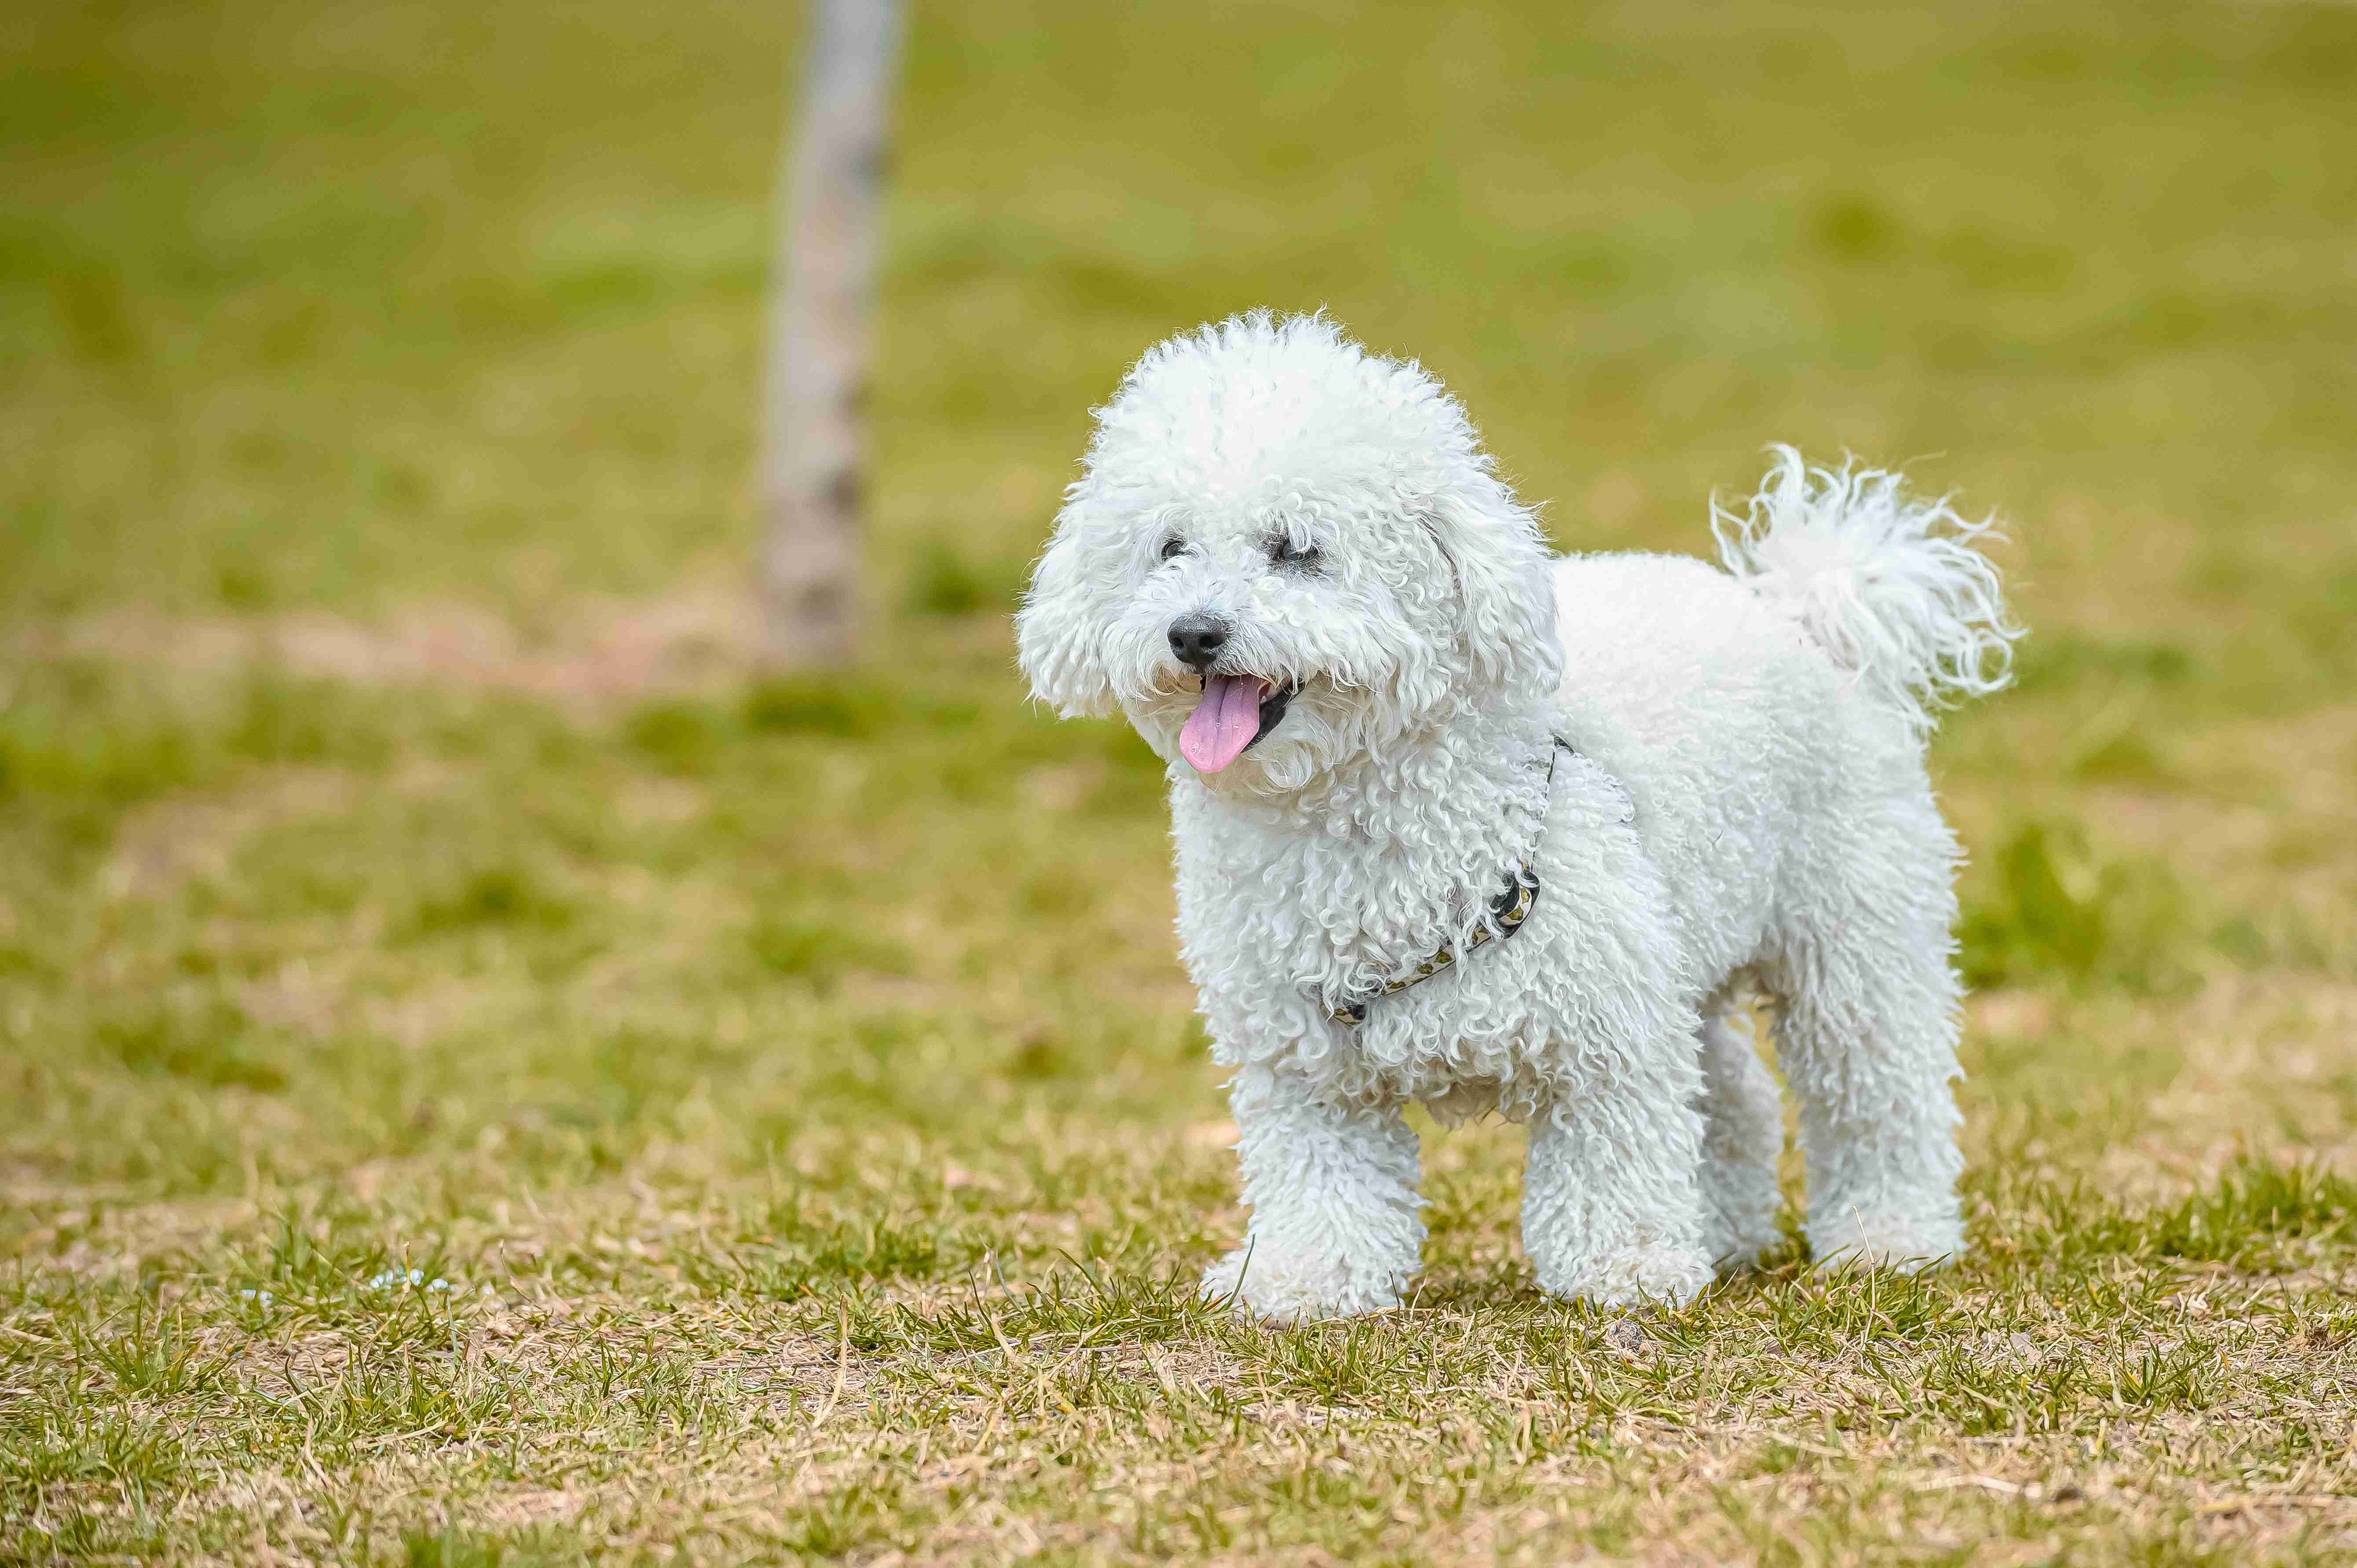 How can you prevent your Poodle puppy from becoming overly dependent on you?